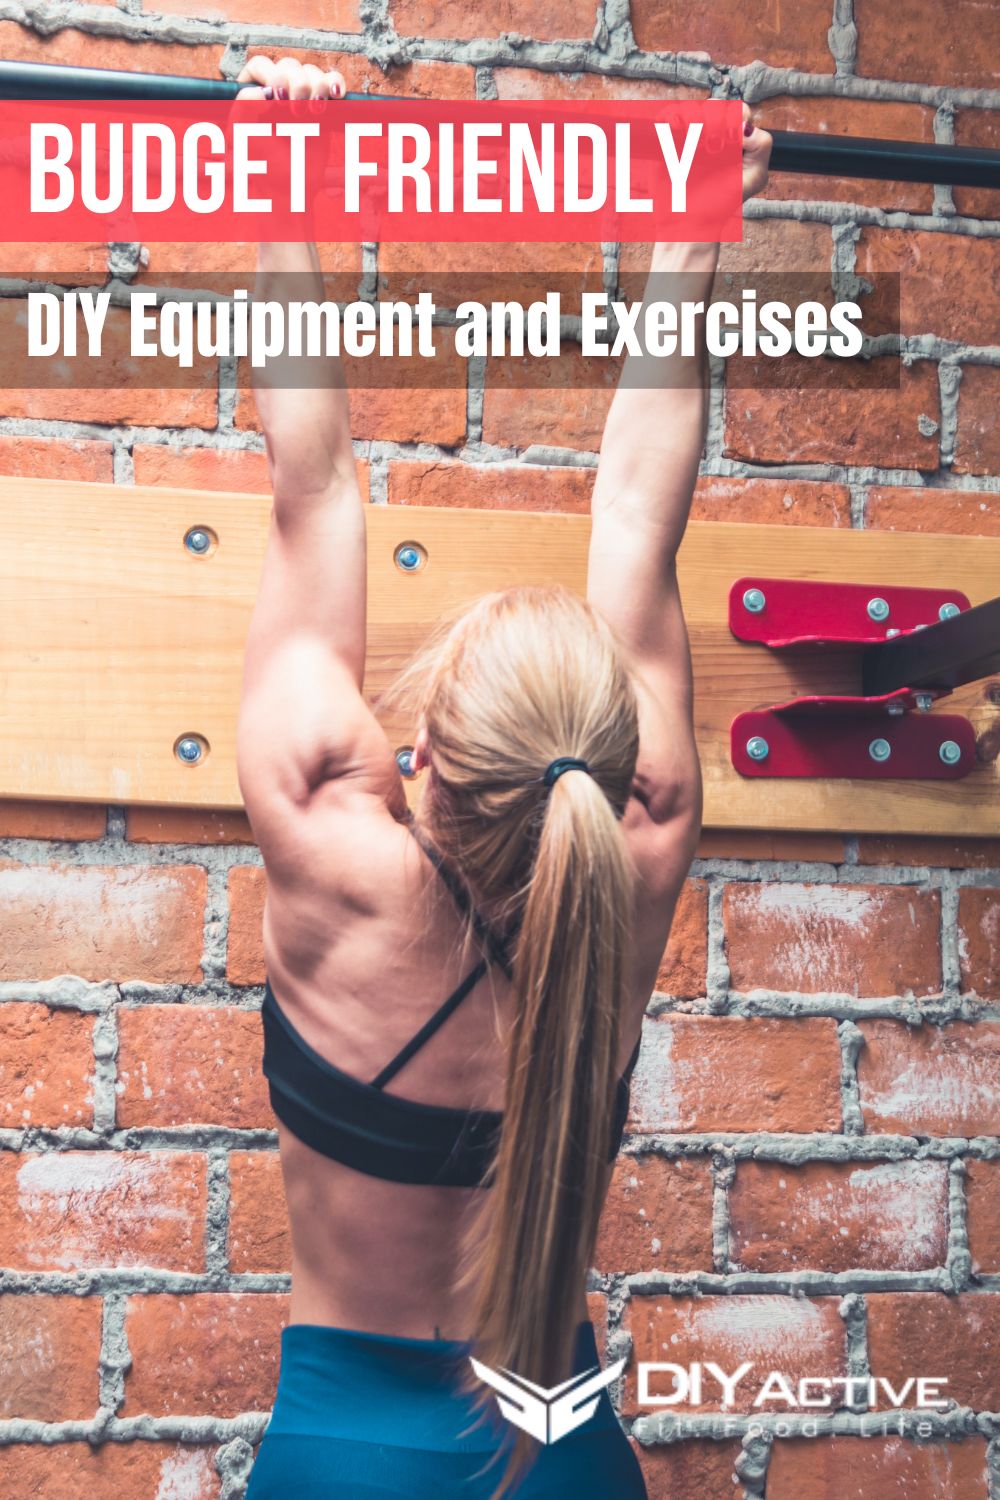 Budget Friendly DIY Equipment and Exercises 2